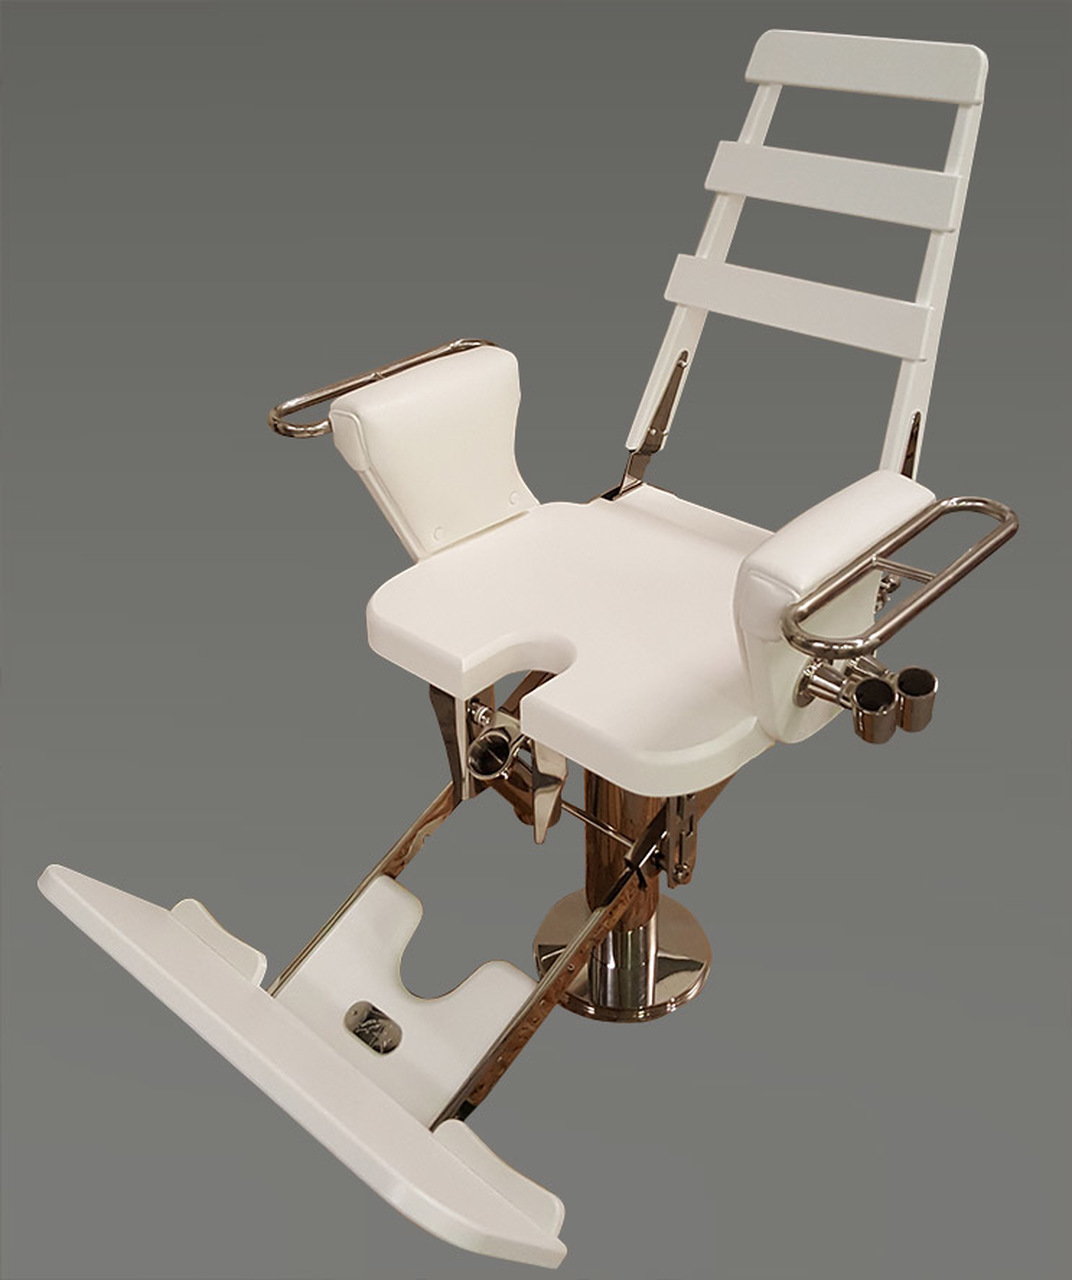 Nautical Design Fighting Chair - Brand New for $6999 - The Hull Truth